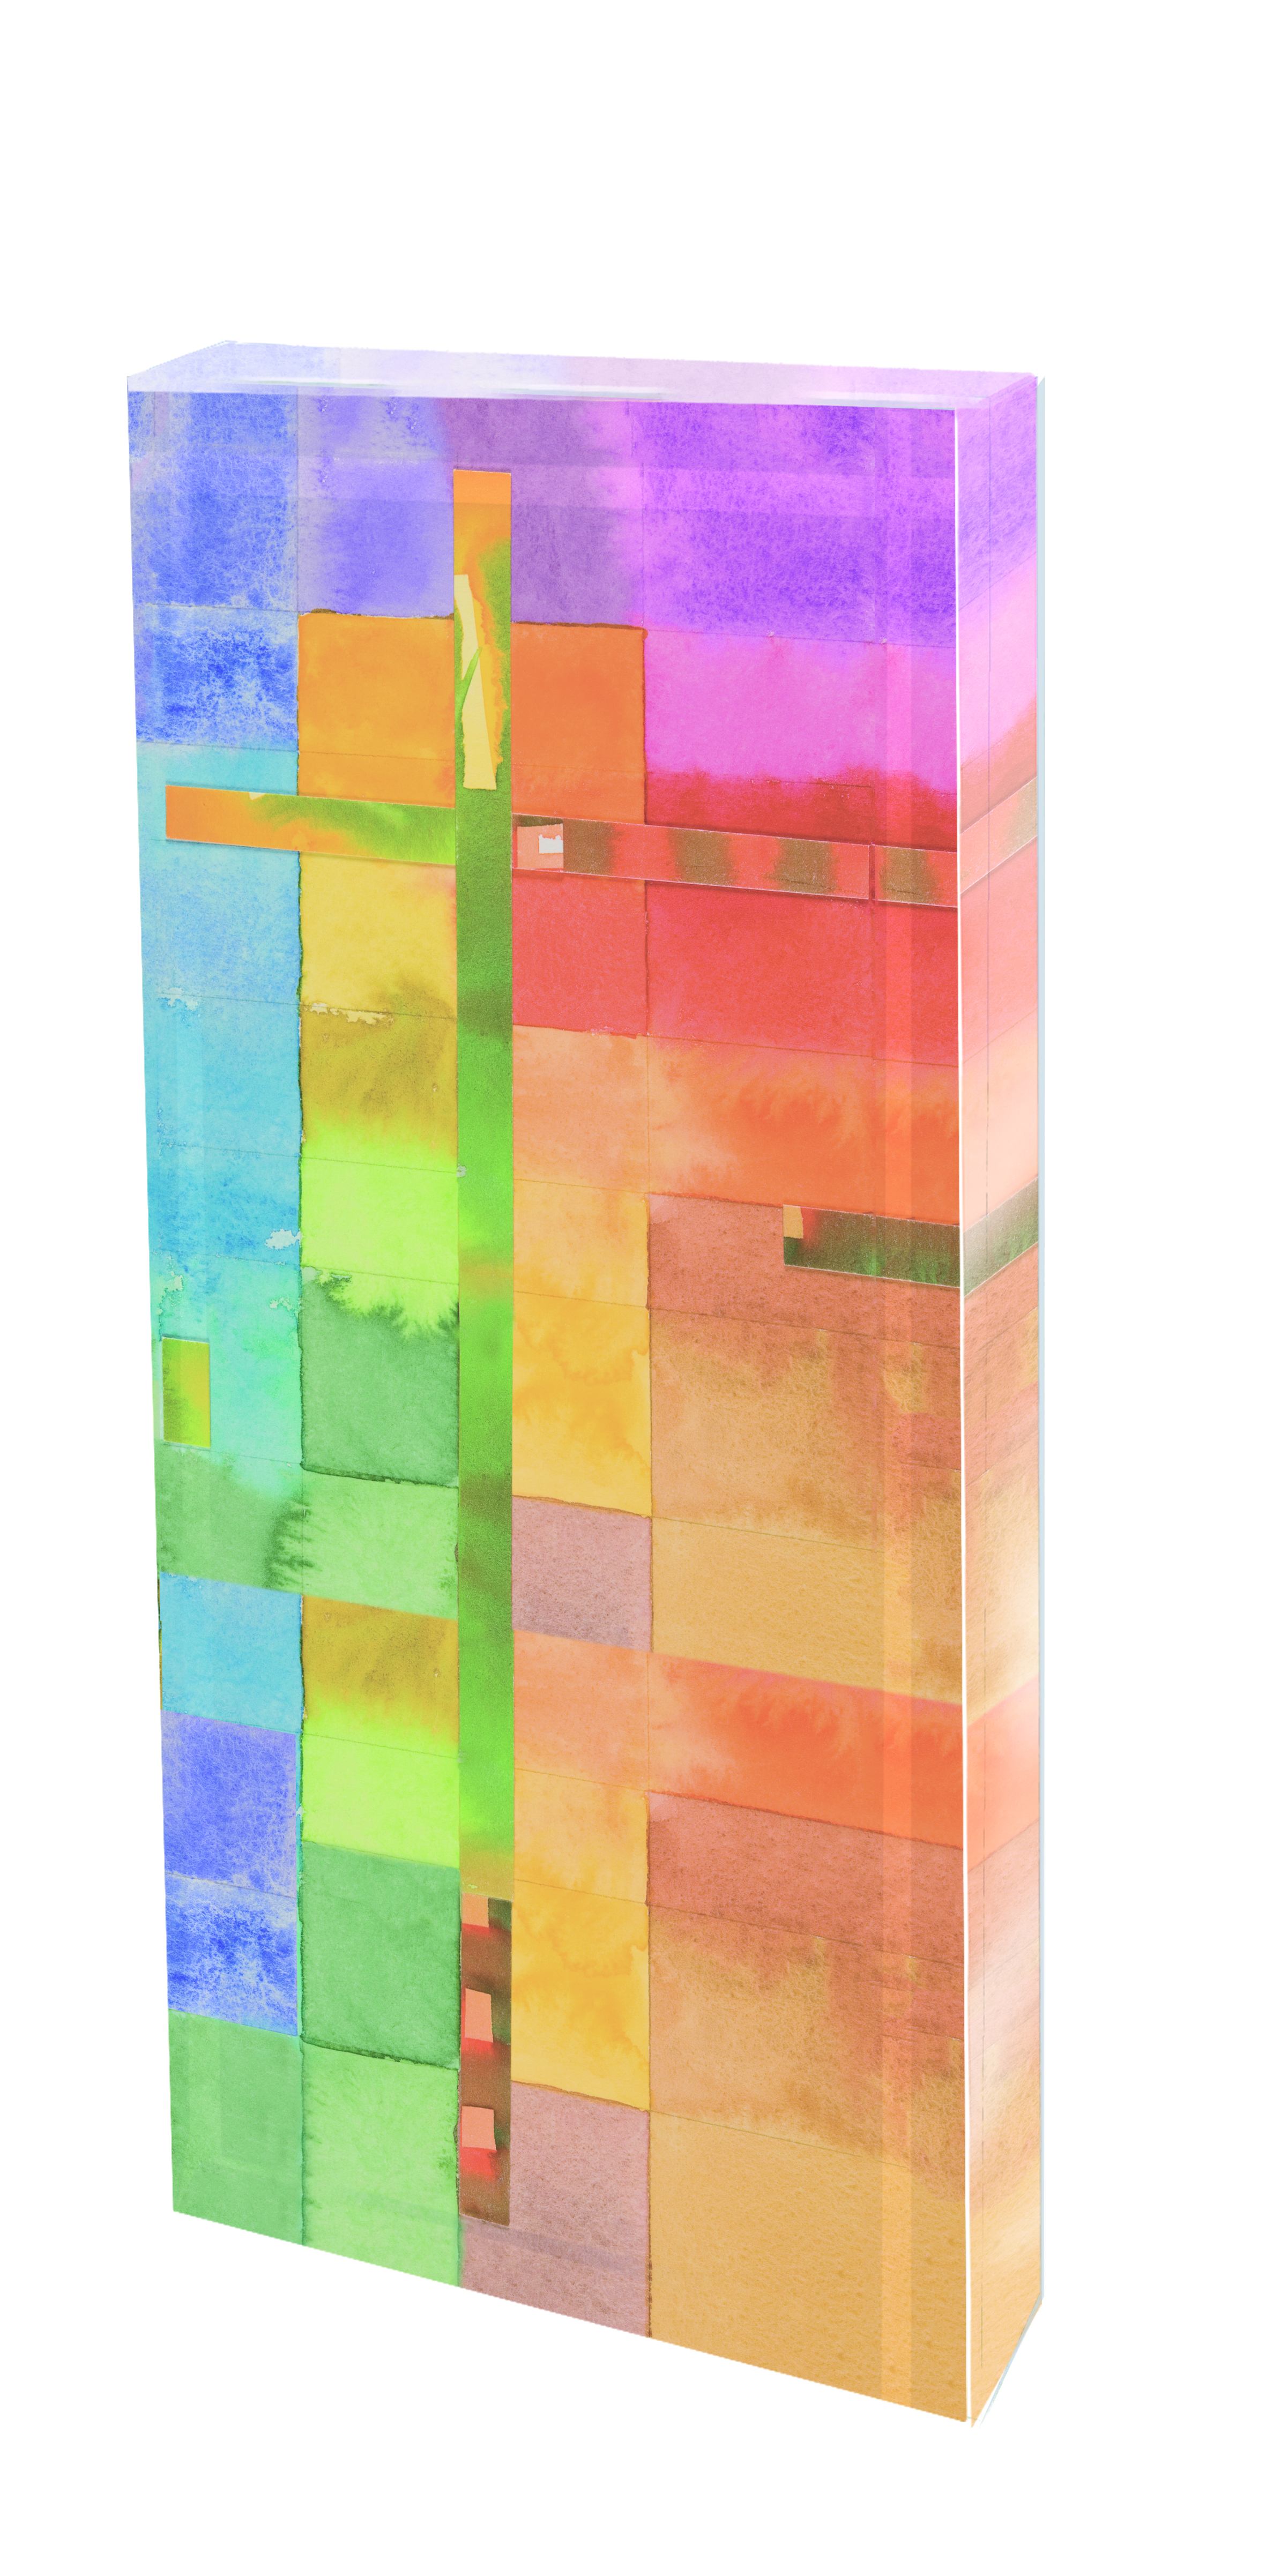 Glass Cuboid for Hanging up “Cross”